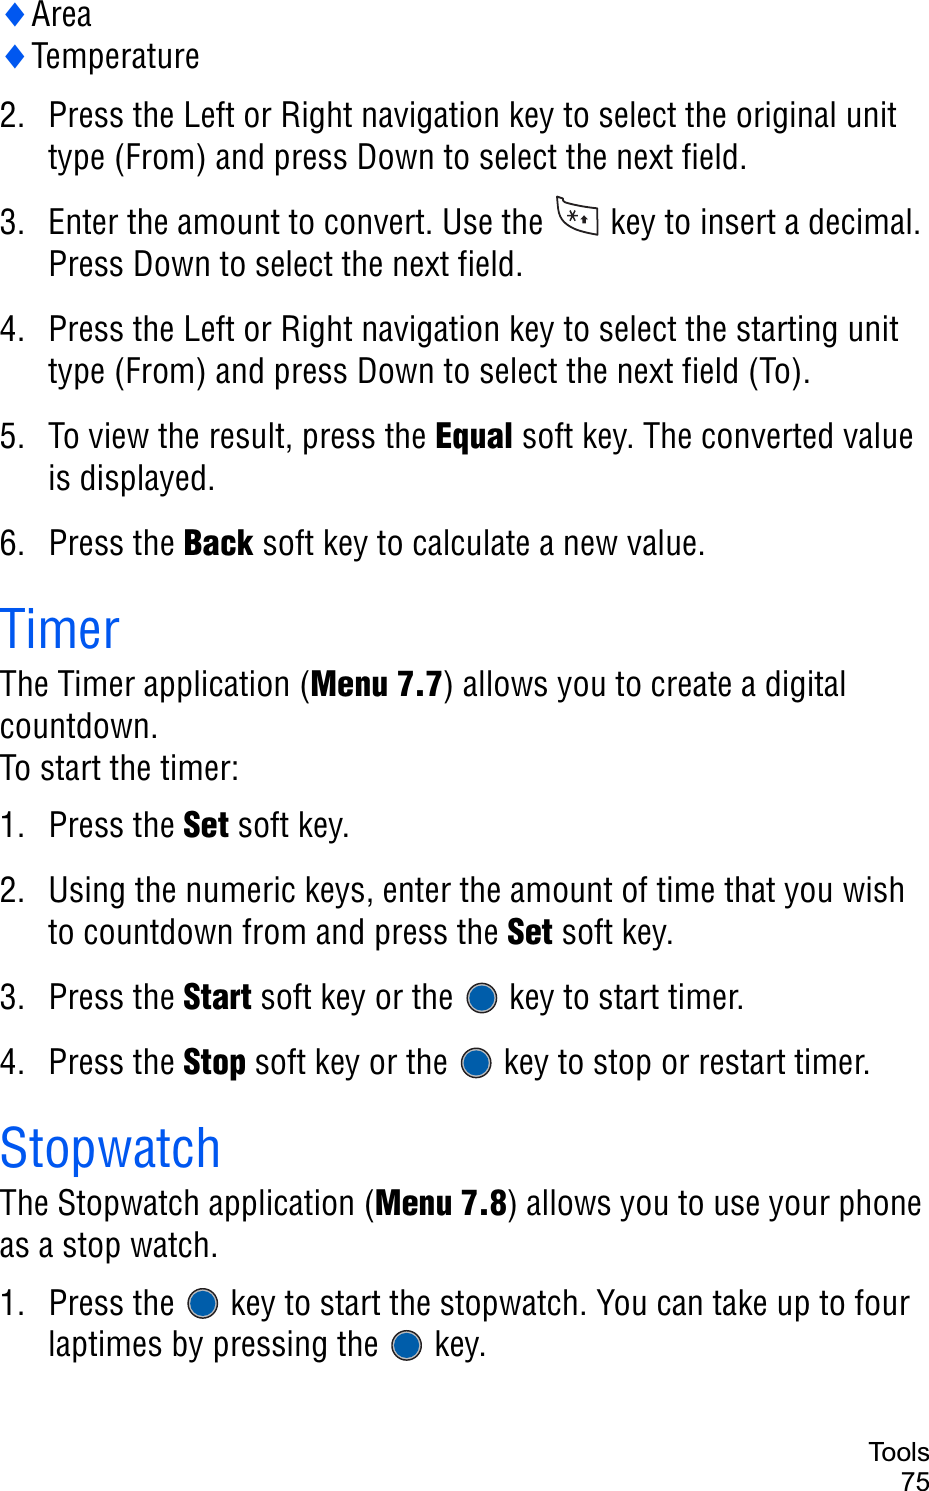 Too ls75iAreaiTemperature2. Press the Left or Right navigation key to select the original unit type (From) and press Down to select the next field.3. Enter the amount to convert. Use the   key to insert a decimal. Press Down to select the next field.4. Press the Left or Right navigation key to select the starting unit type (From) and press Down to select the next field (To).5. To view the result, press the Equal soft key. The converted value is displayed.6. Press the Back soft key to calculate a new value.TimerThe Timer application (Menu 7.7) allows you to create a digital countdown.To start the timer:1. Press the Set soft key.2. Using the numeric keys, enter the amount of time that you wish to countdown from and press the Set soft key. 3. Press the Start soft key or the   key to start timer.4. Press the Stop soft key or the   key to stop or restart timer.StopwatchThe Stopwatch application (Menu 7.8) allows you to use your phone as a stop watch.1. Press the   key to start the stopwatch. You can take up to four laptimes by pressing the   key.